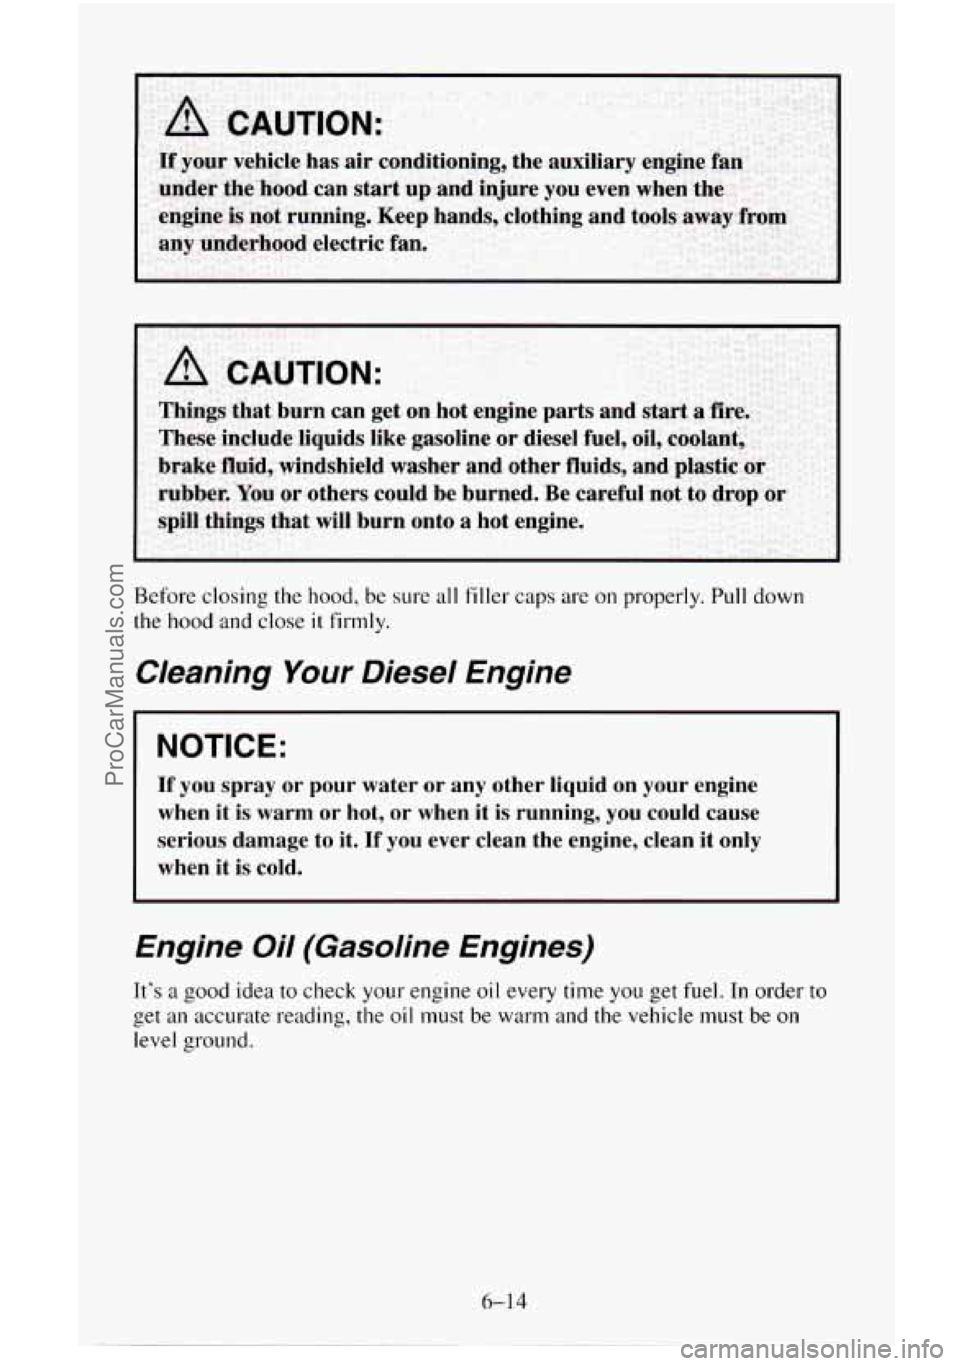 CHEVROLET SUBURBAN 1995  Owners Manual Before closing the hood, be sure  all filler  caps  are  on properly.  Pull down 
the hood and close it firmly. 
Cleaning Your Diesel  Engine 
NOTICE: 
If you  spray  or  pour  water  or any  other  l